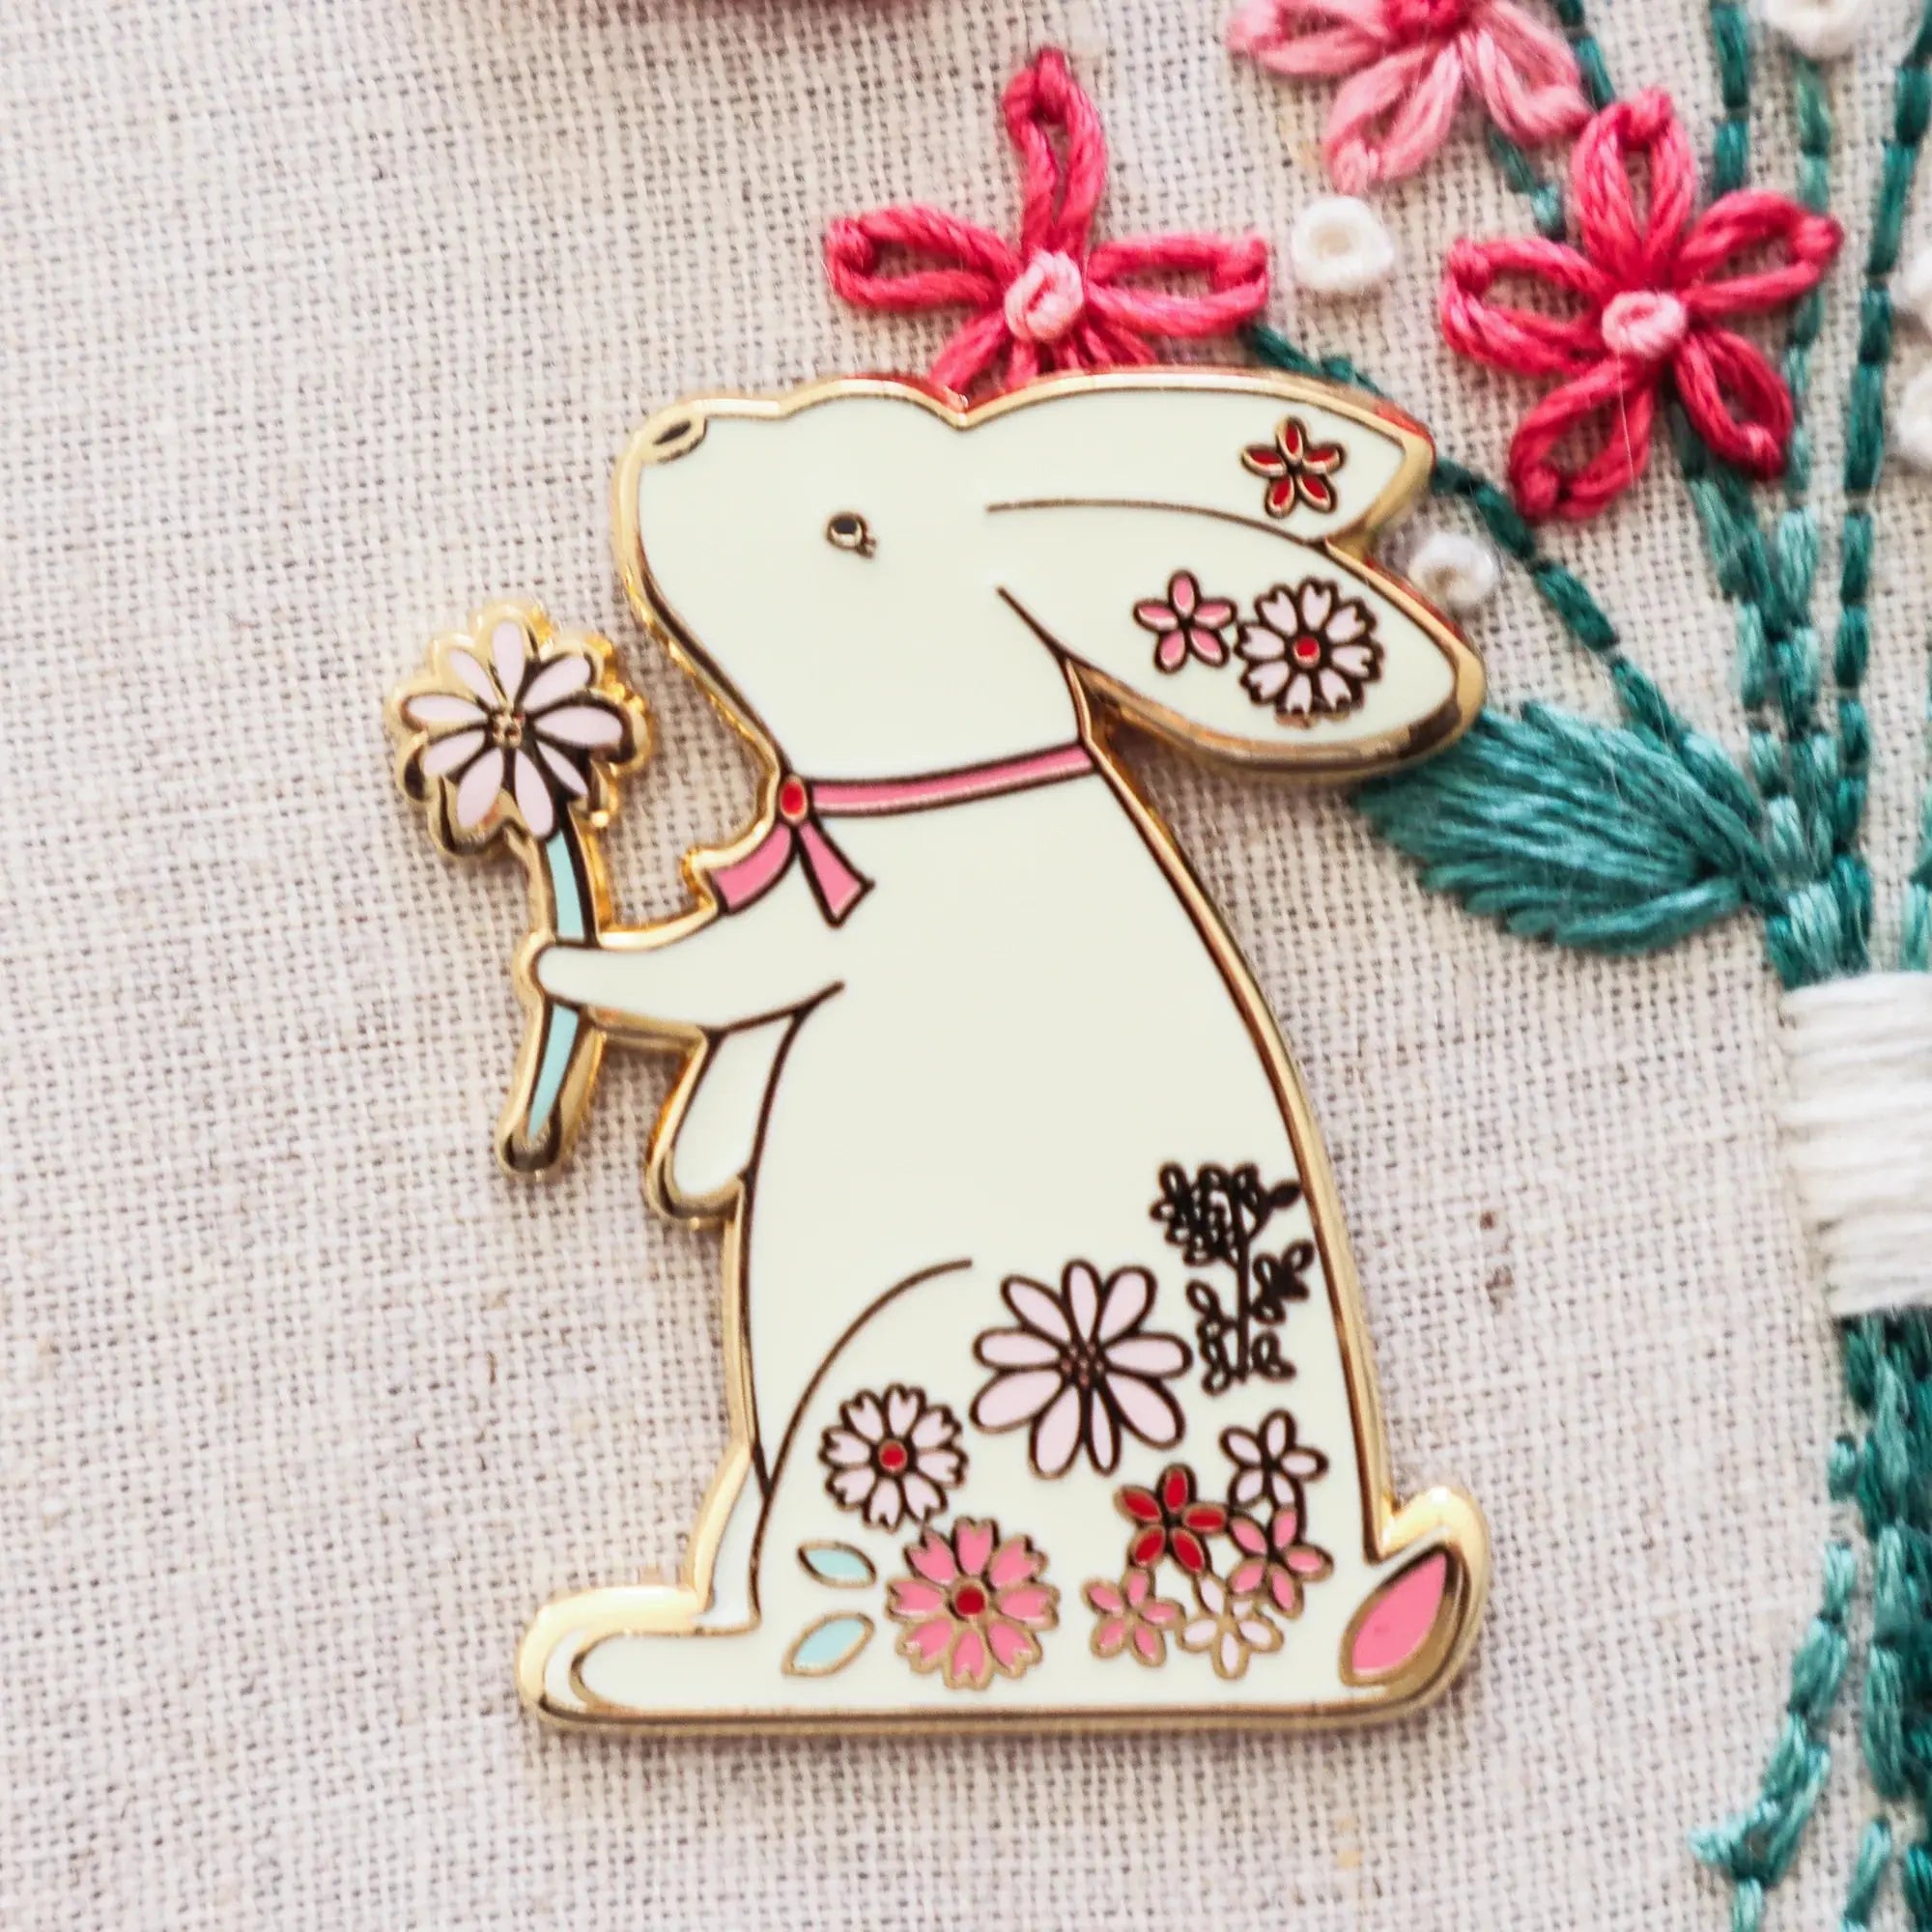 Floral Bunny Needle Minder by Flamingo Toes Flamingo Toes